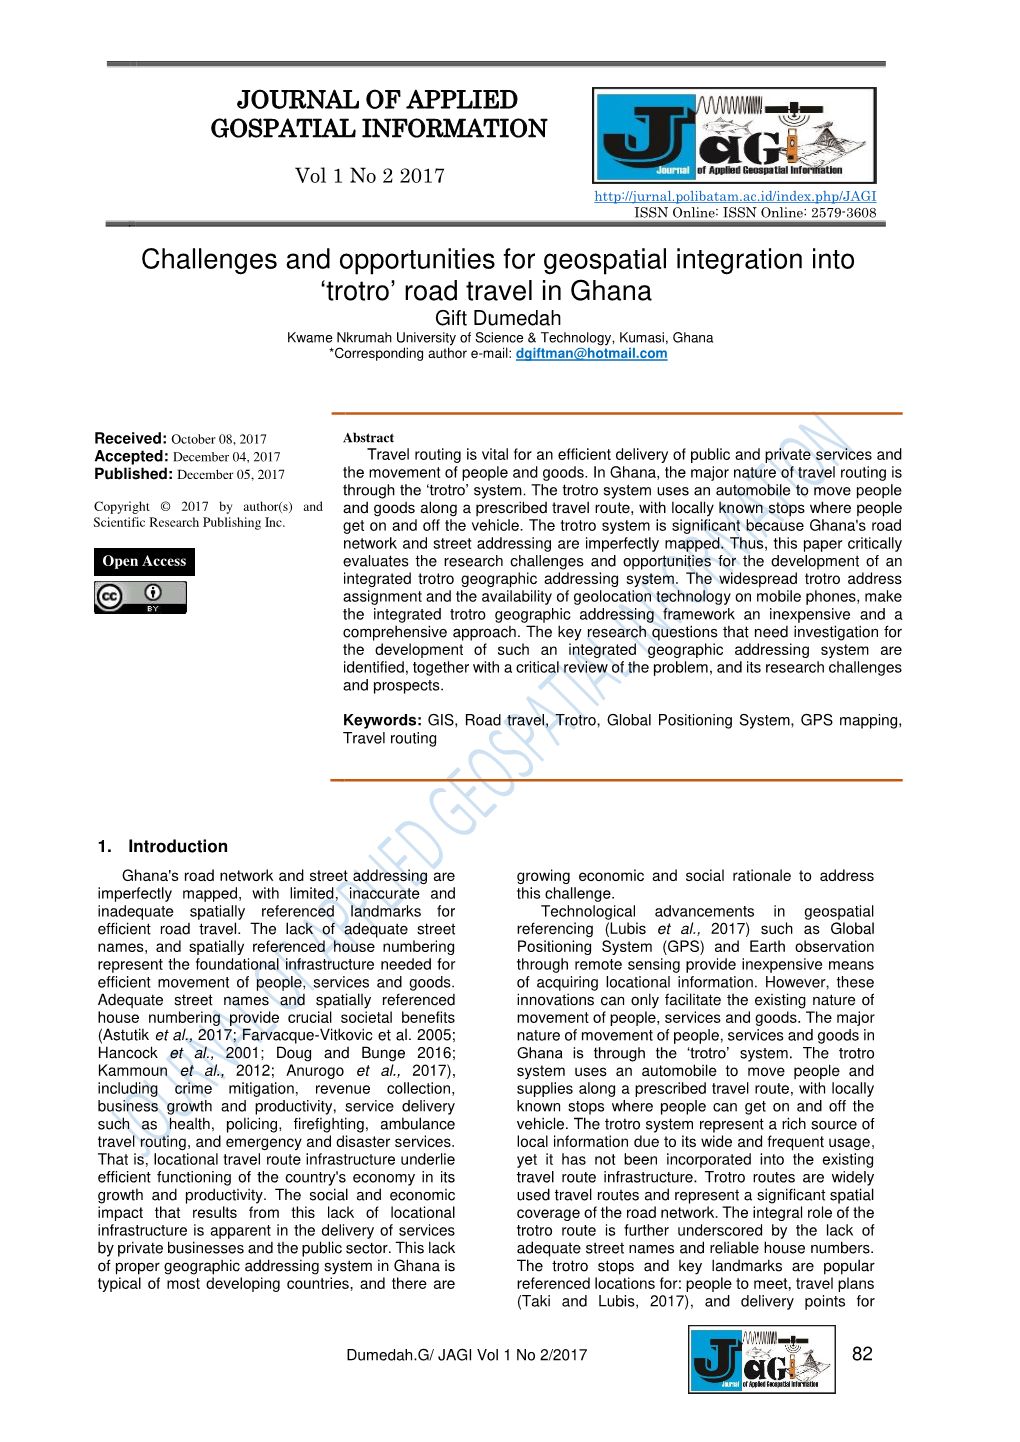 Challenges and Opportunities for Geospatial Integration Into